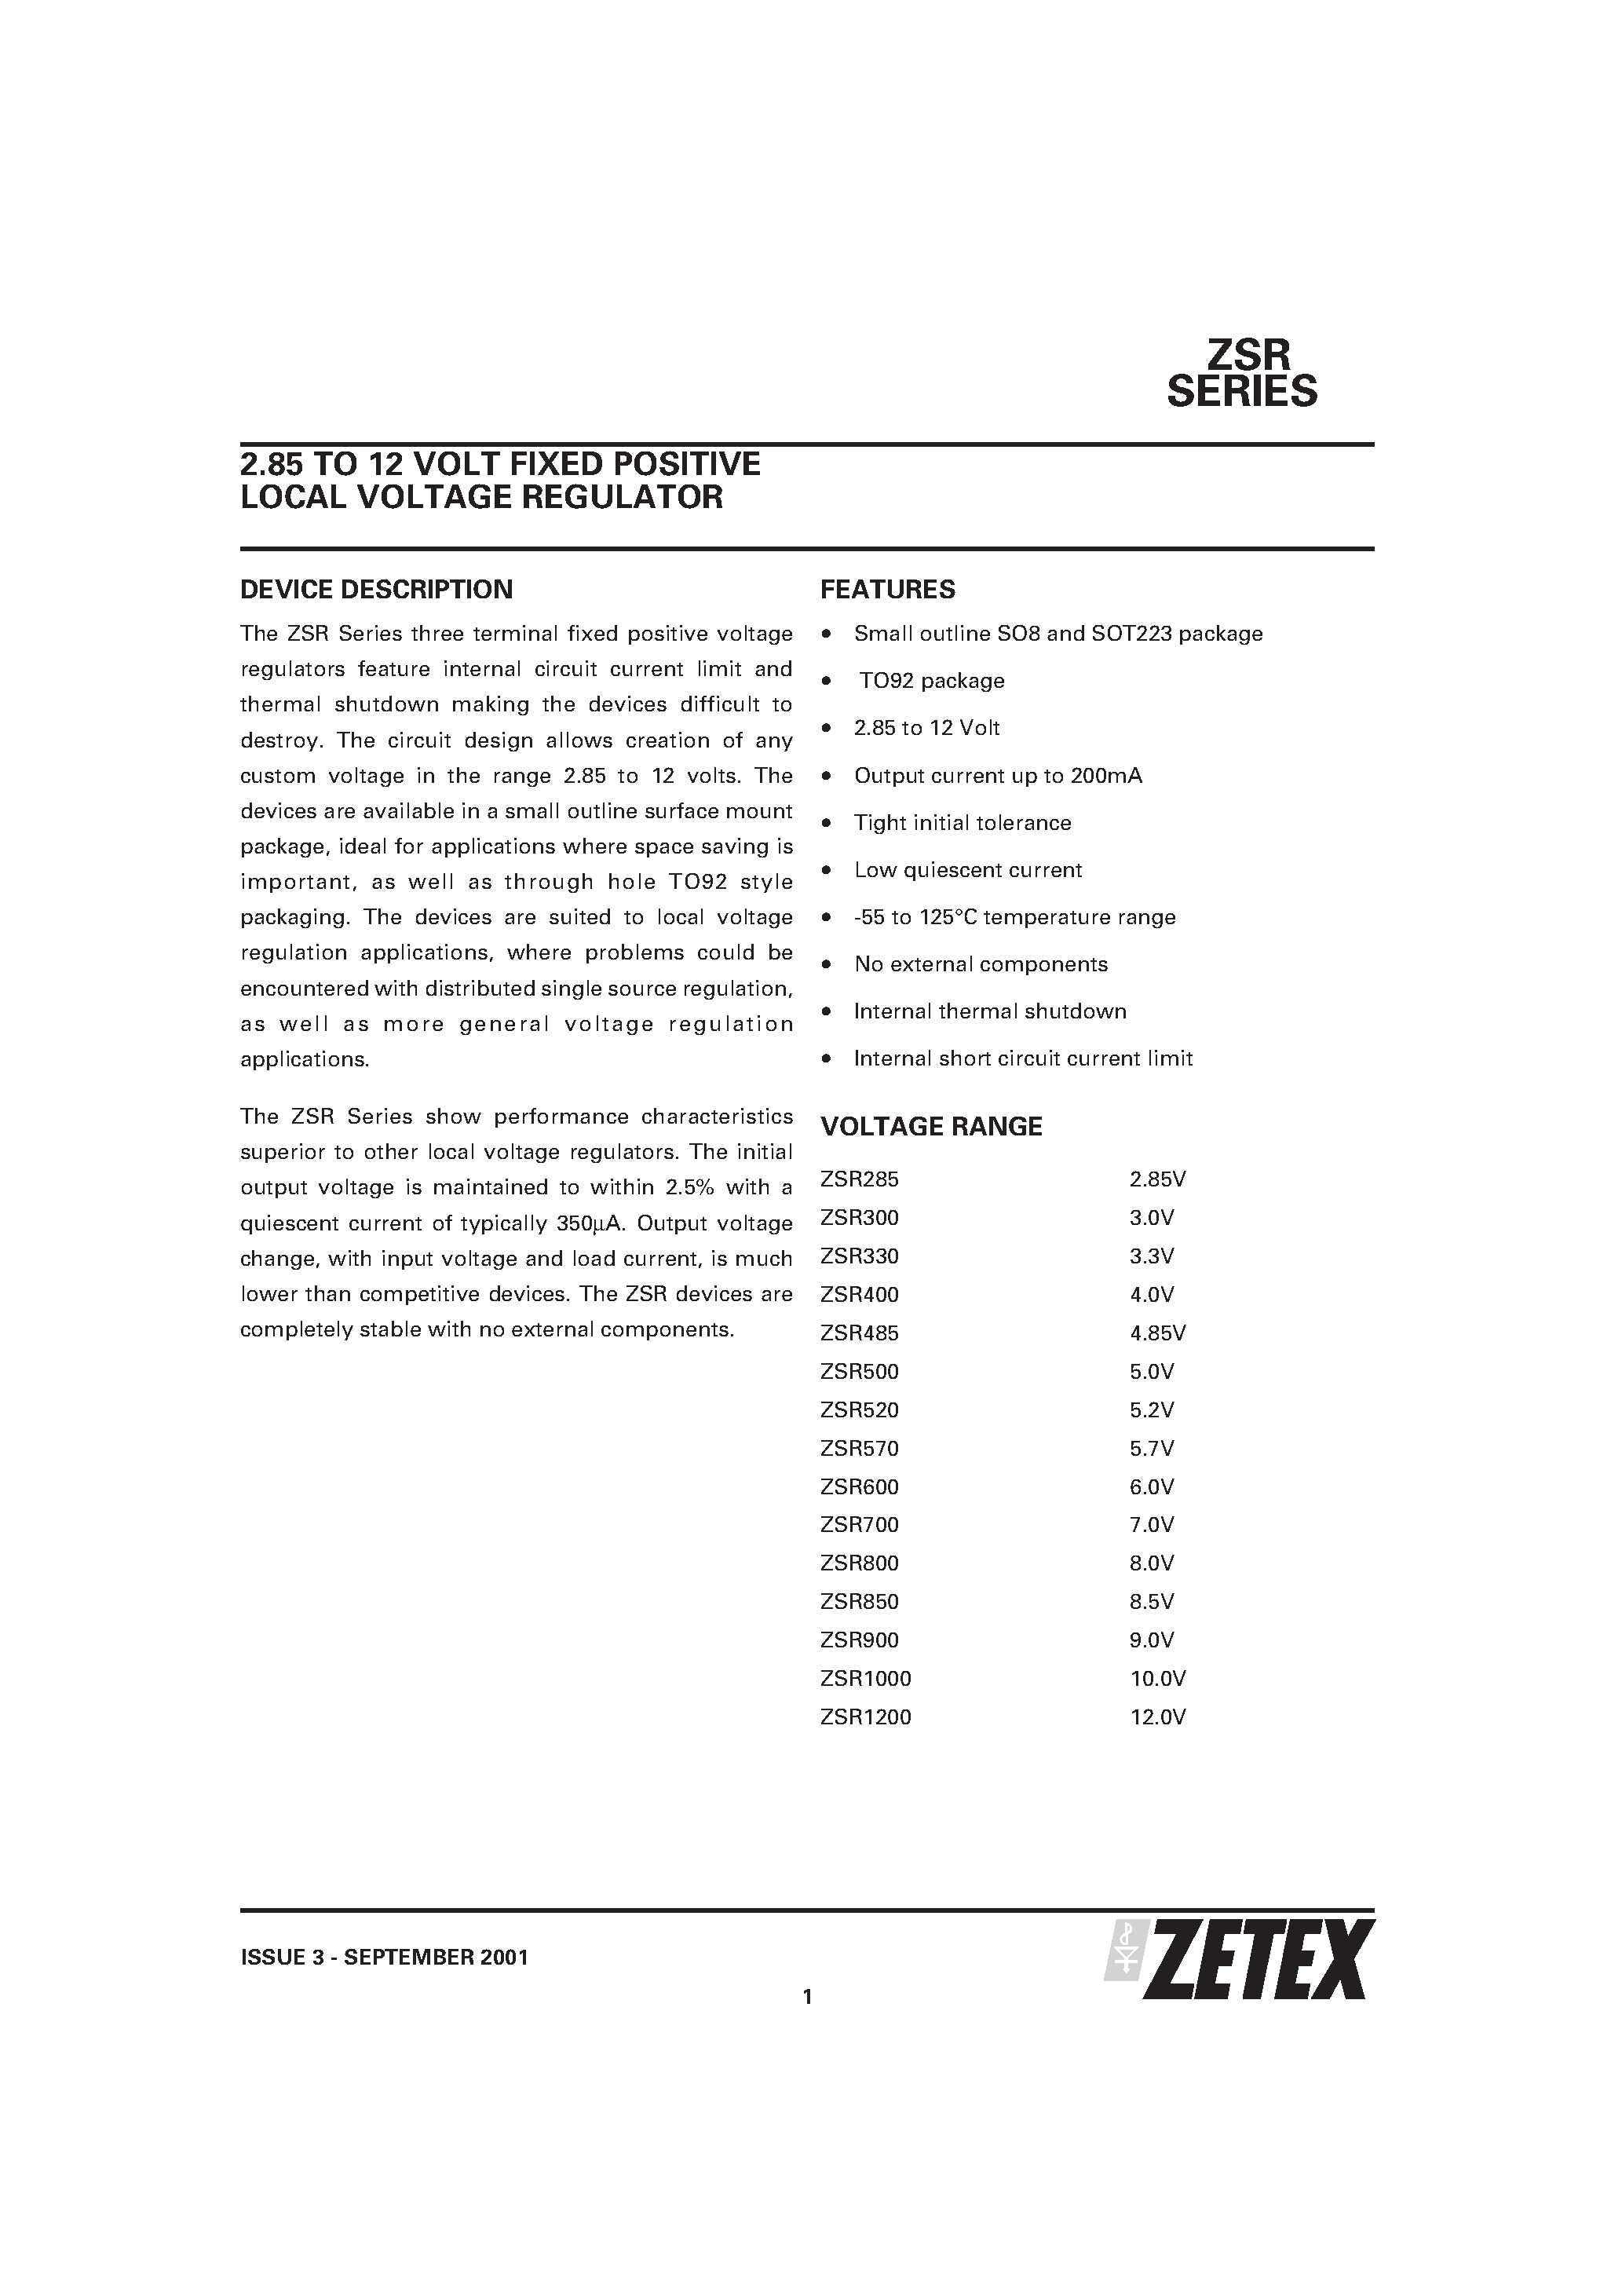 Datasheet ZSR1000C - 2.85 TO 12 VOLT FIXED POSITIVE LOCAL VOLTAGE REGULATOR page 1